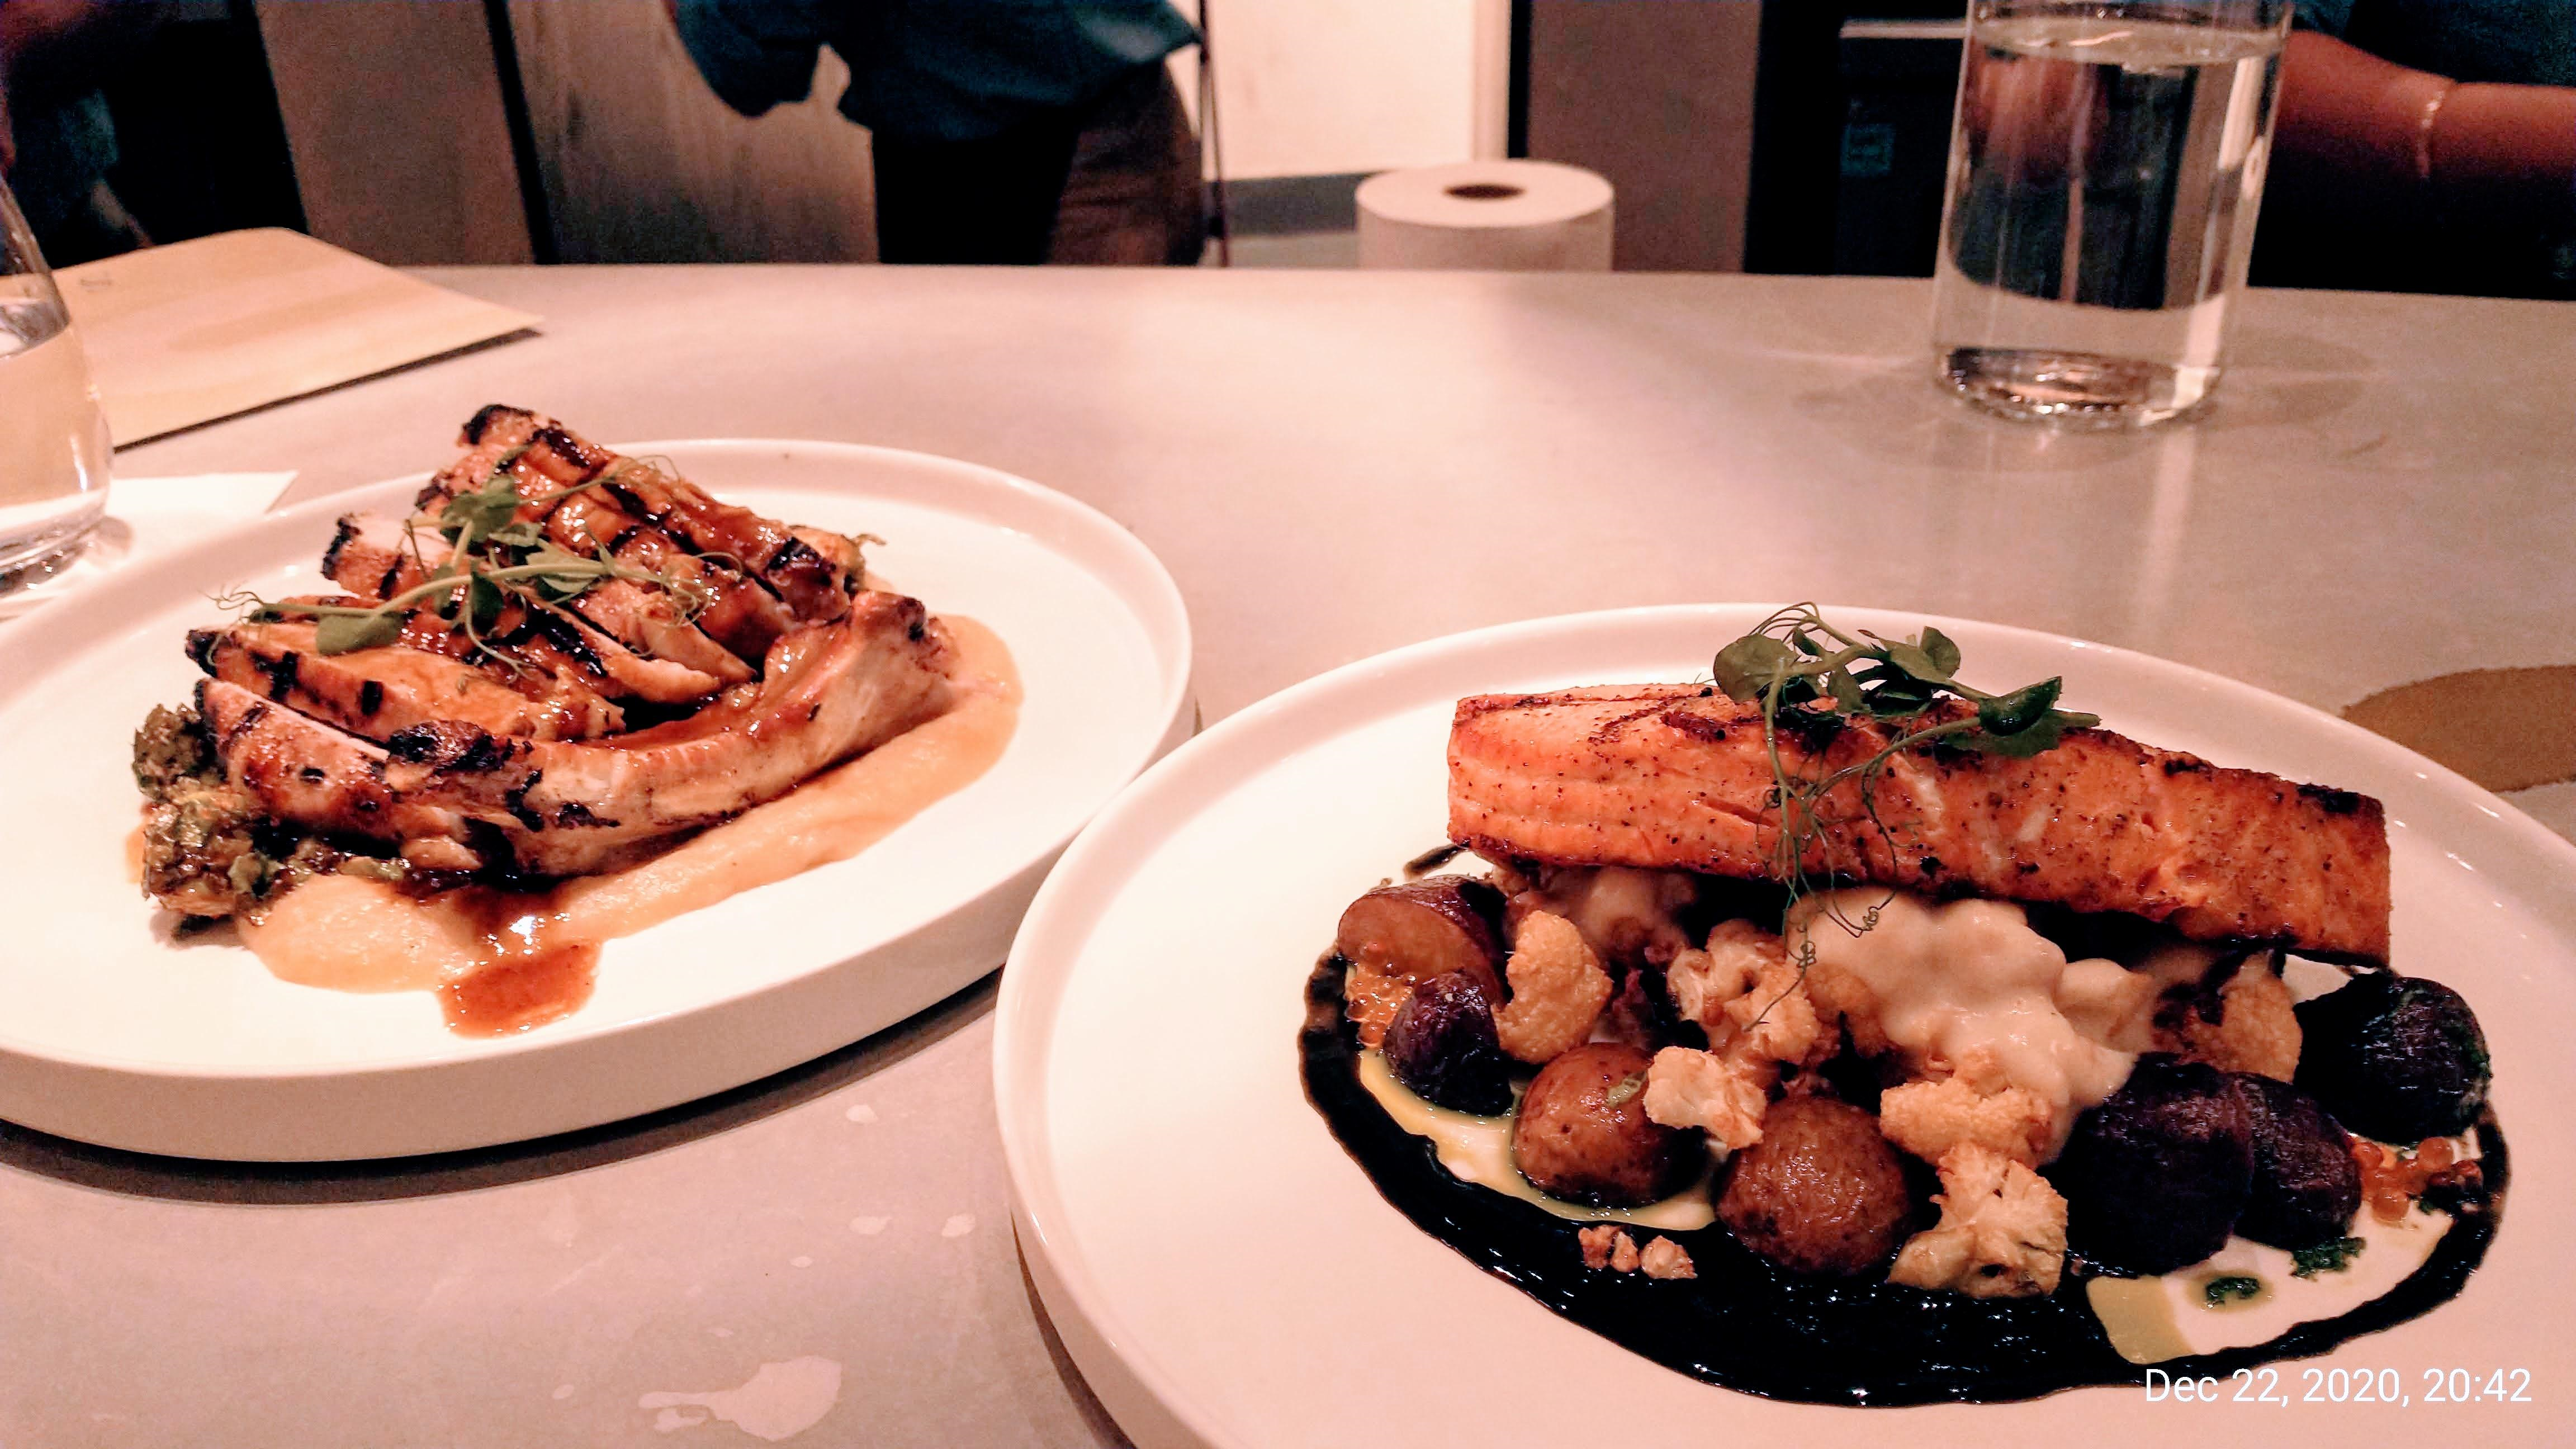 picture of the salmon and also the pork chop dishes